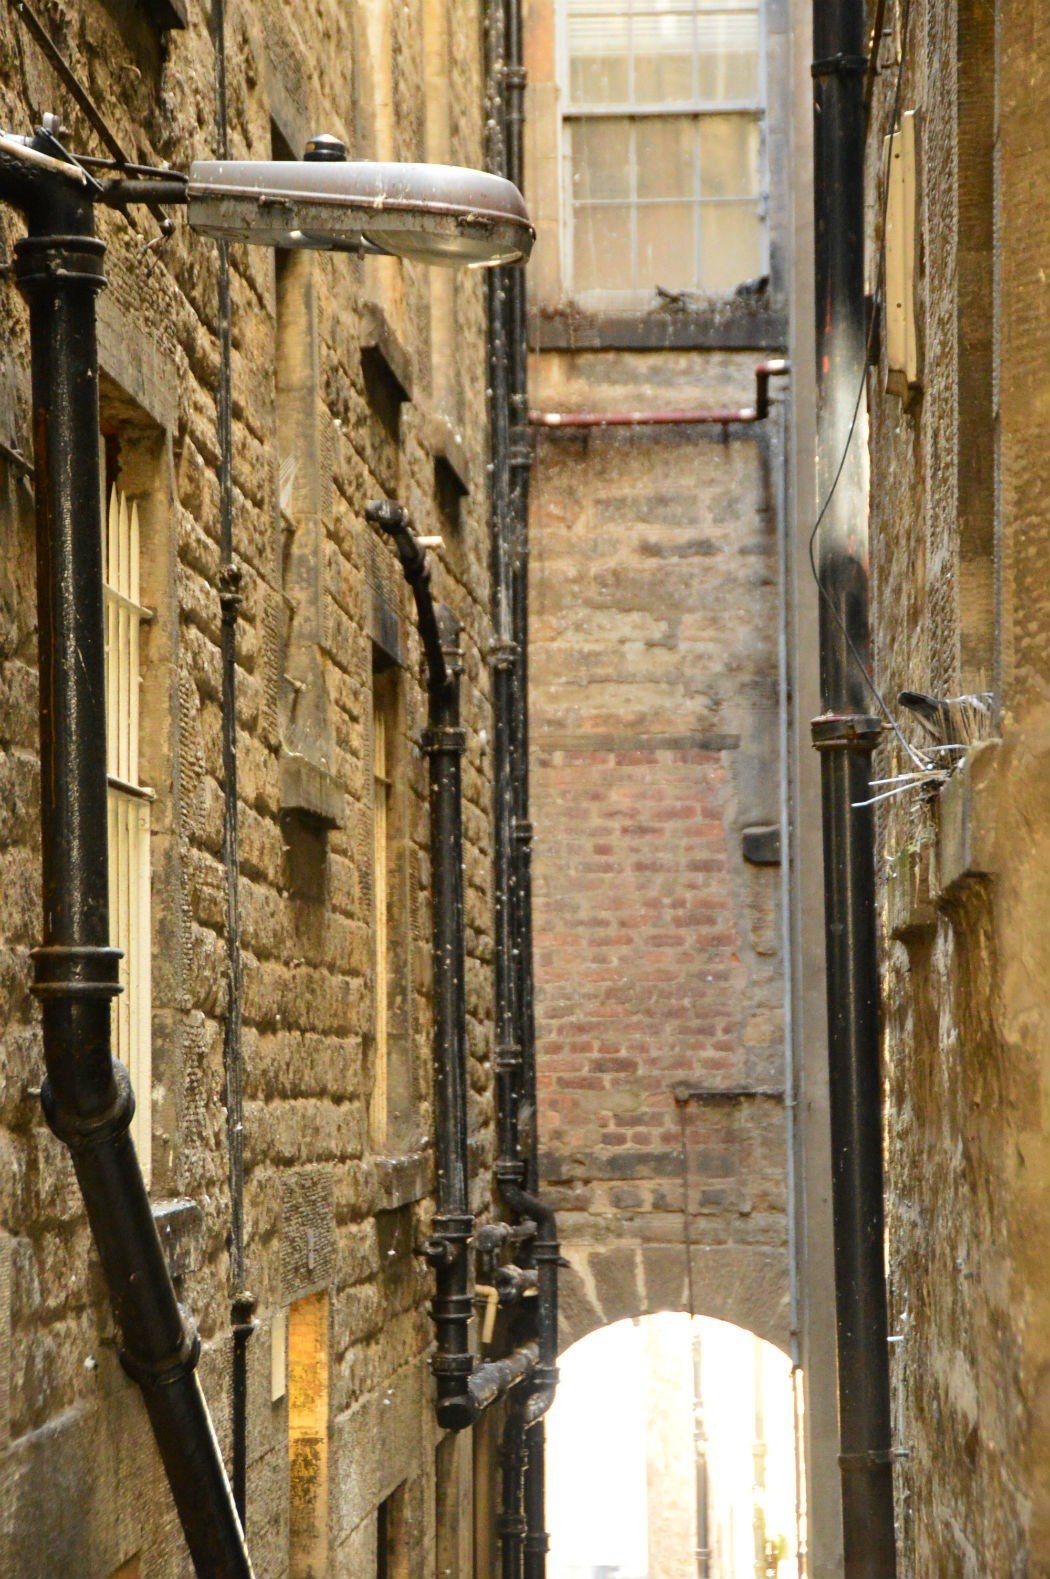 narrow alley way in edinburgh with a declining staircase